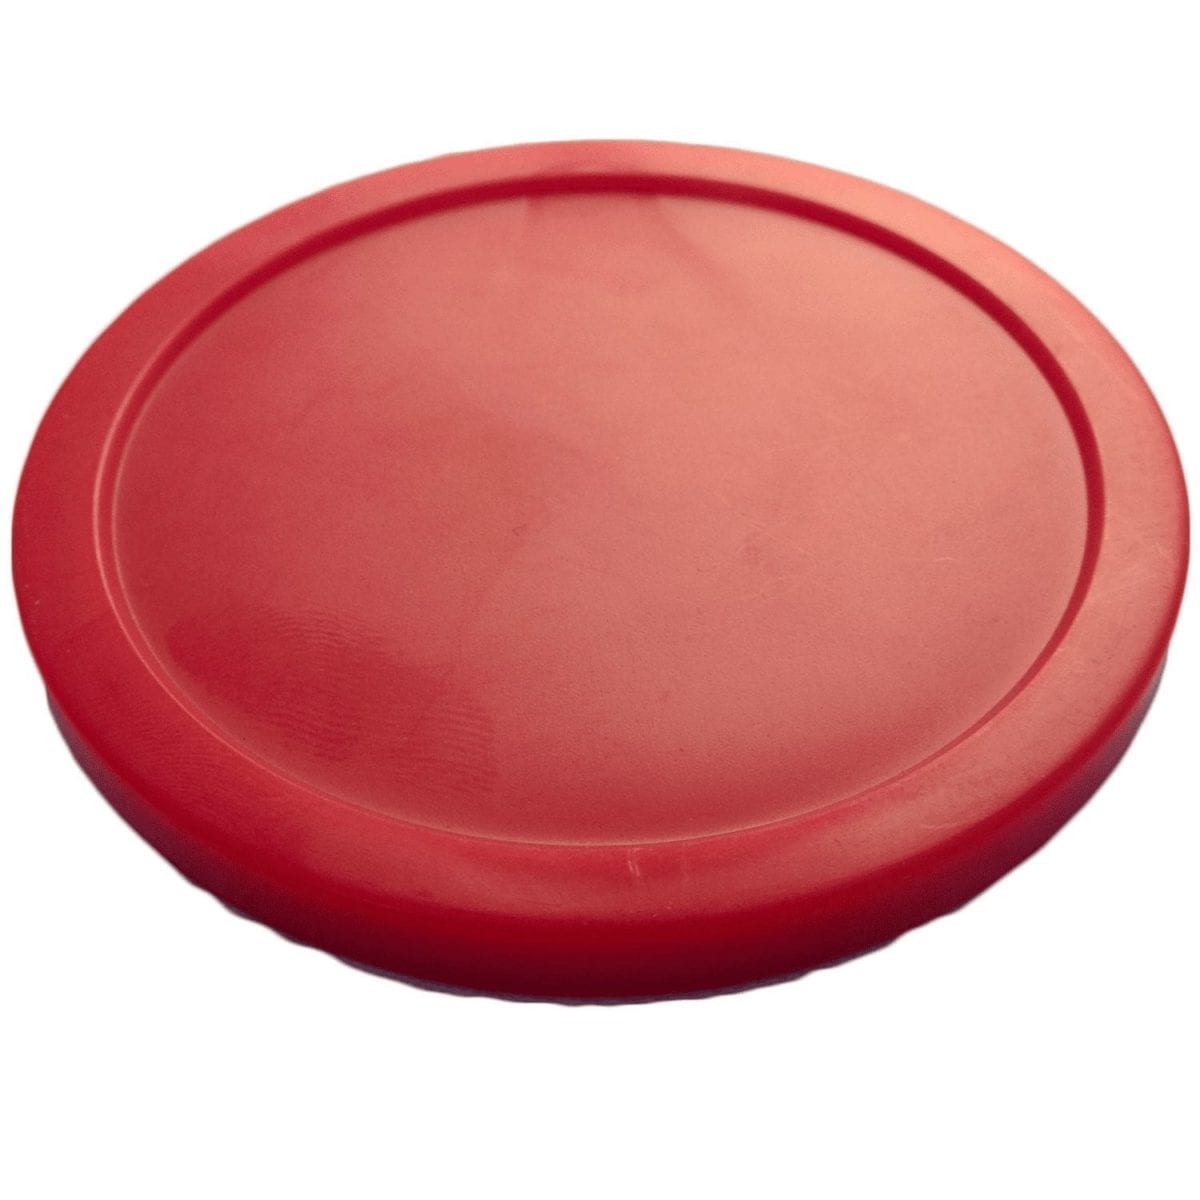 Phinacan 6PCS Air Hockey Pucks Big Size Table Replacement Puck for Home Adult 82mm, Red 